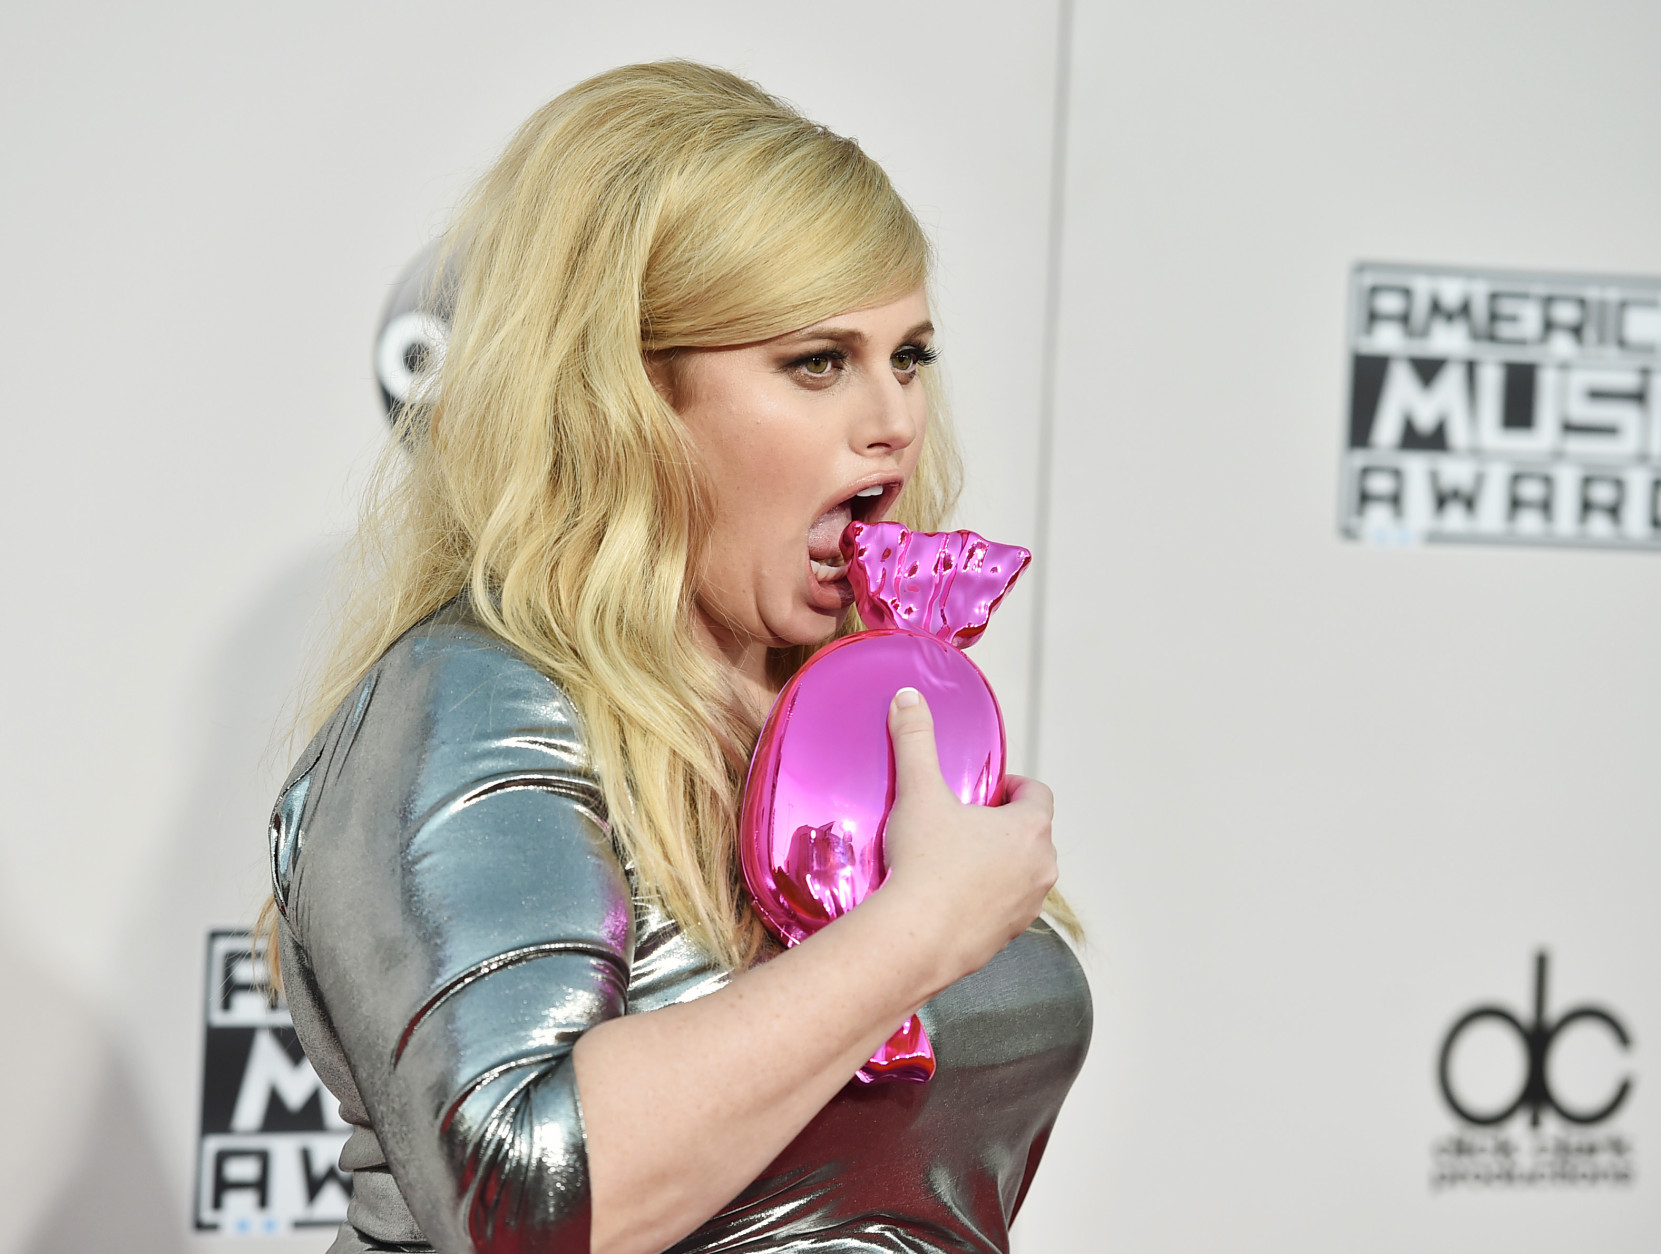 Rebel Wilson arrives at the American Music Awards at the Microsoft Theater on Sunday, Nov. 22, 2015, in Los Angeles. (Photo by Jordan Strauss/Invision/AP)